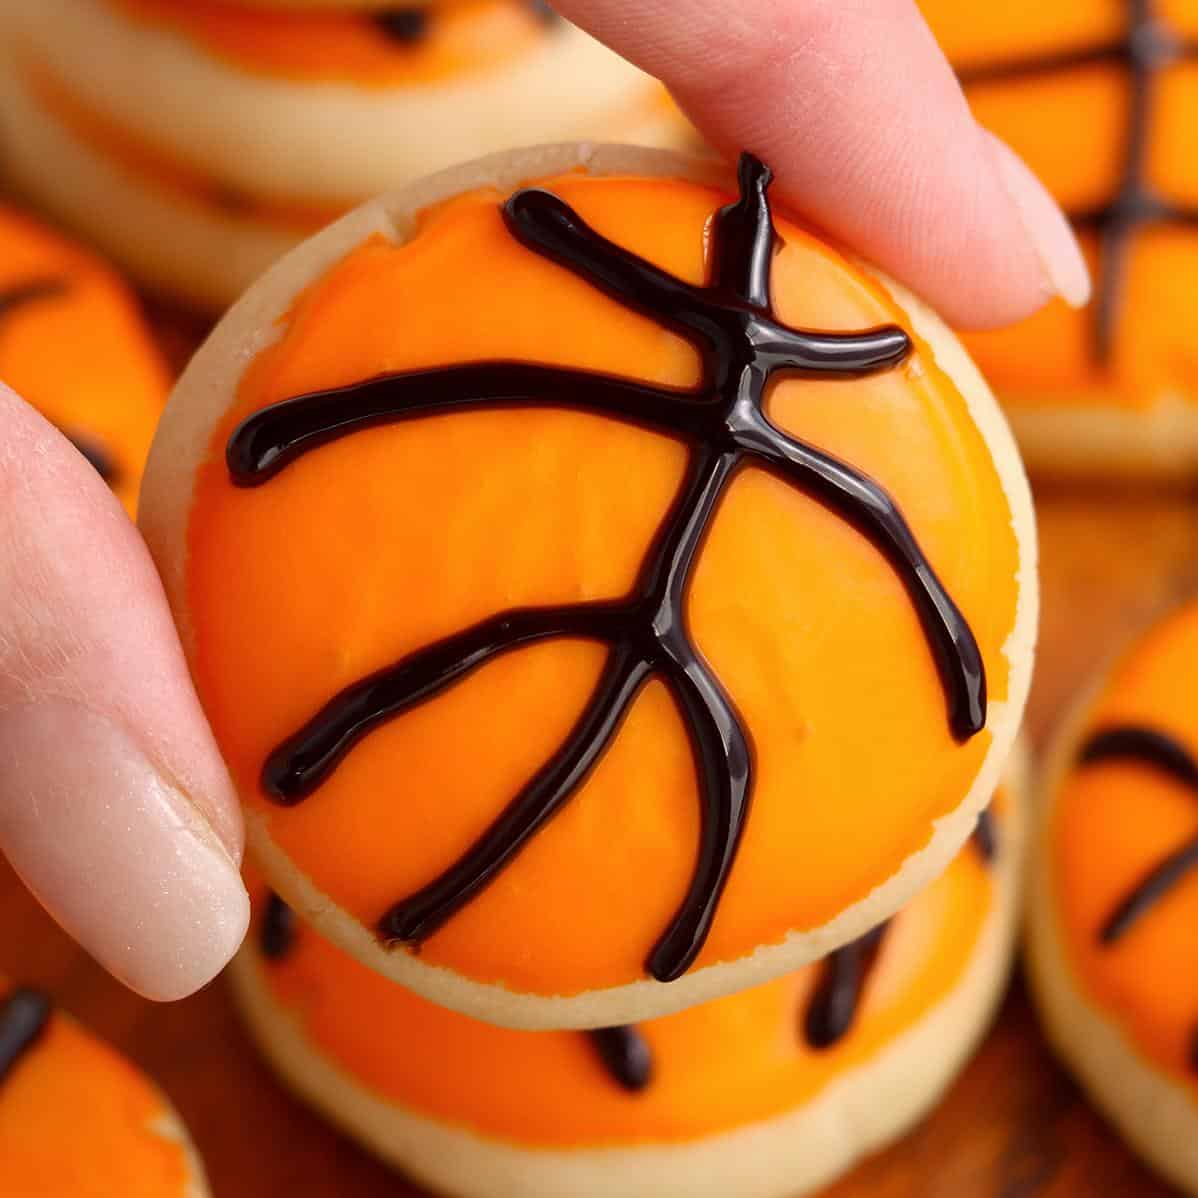  Step up your dessert game and make these delicious basketball team cookies.